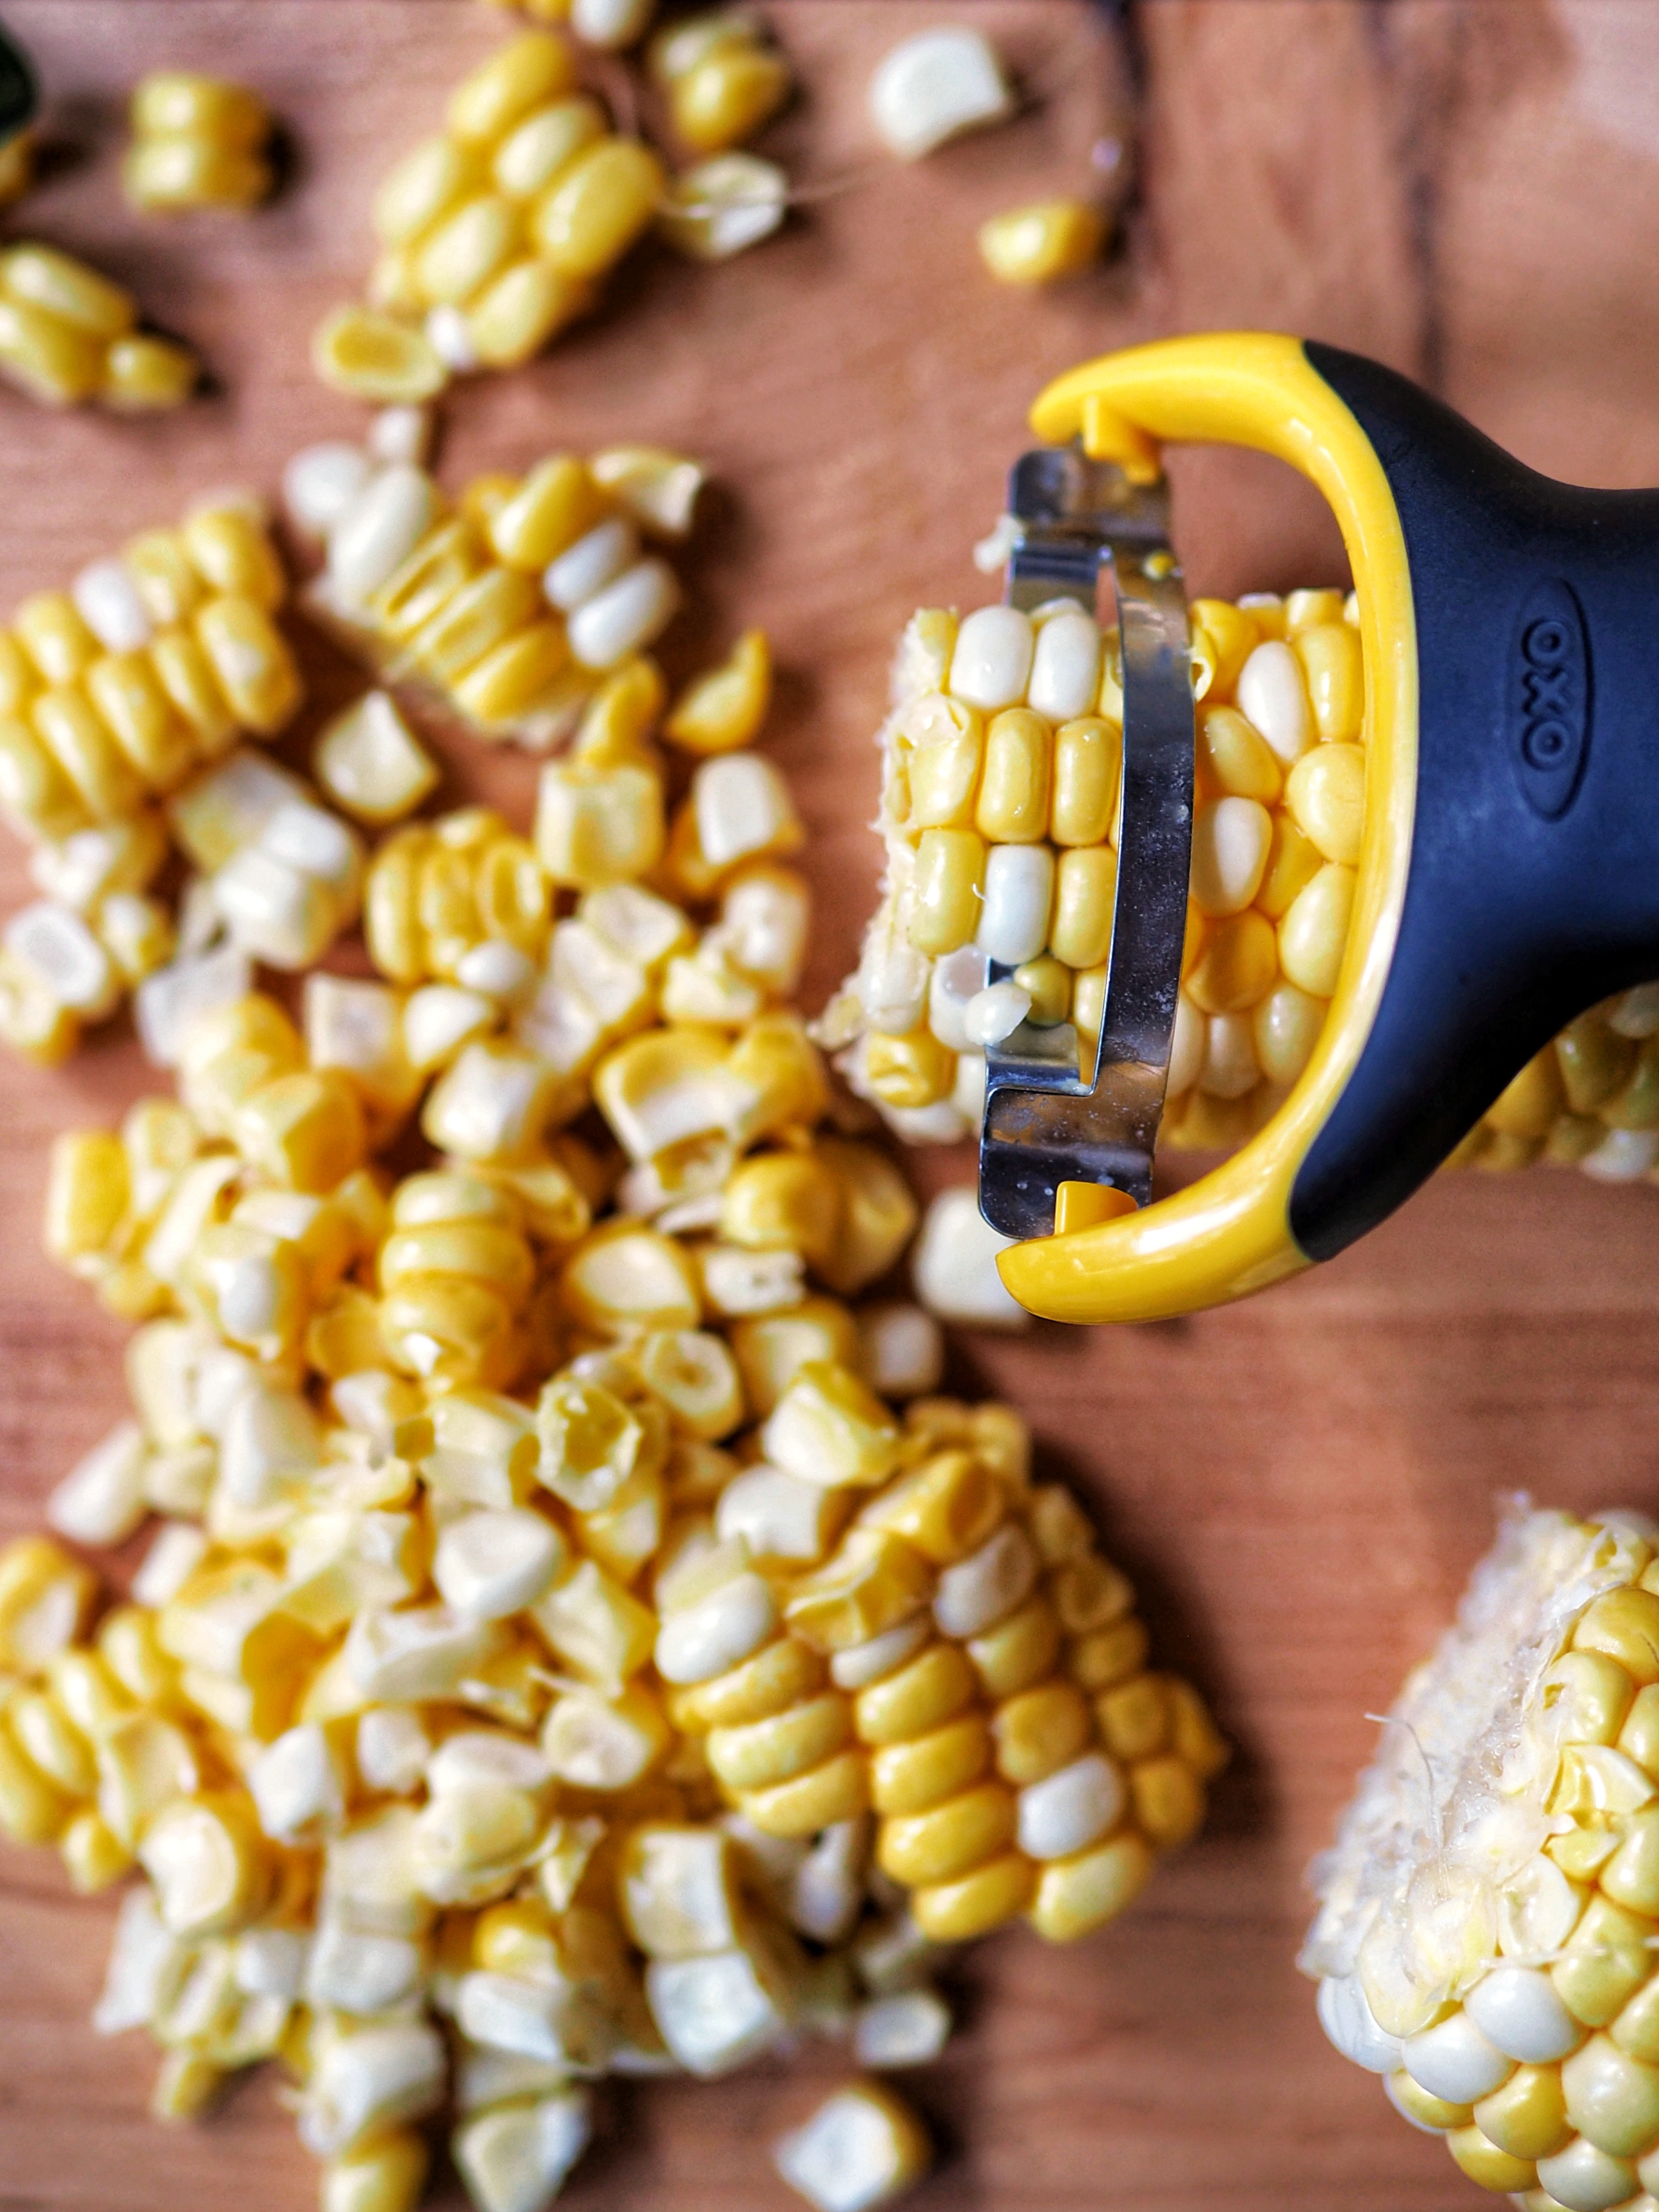 OXO – Making life a bit easier. Check out how I made Esquites using their  corn prep peeler!